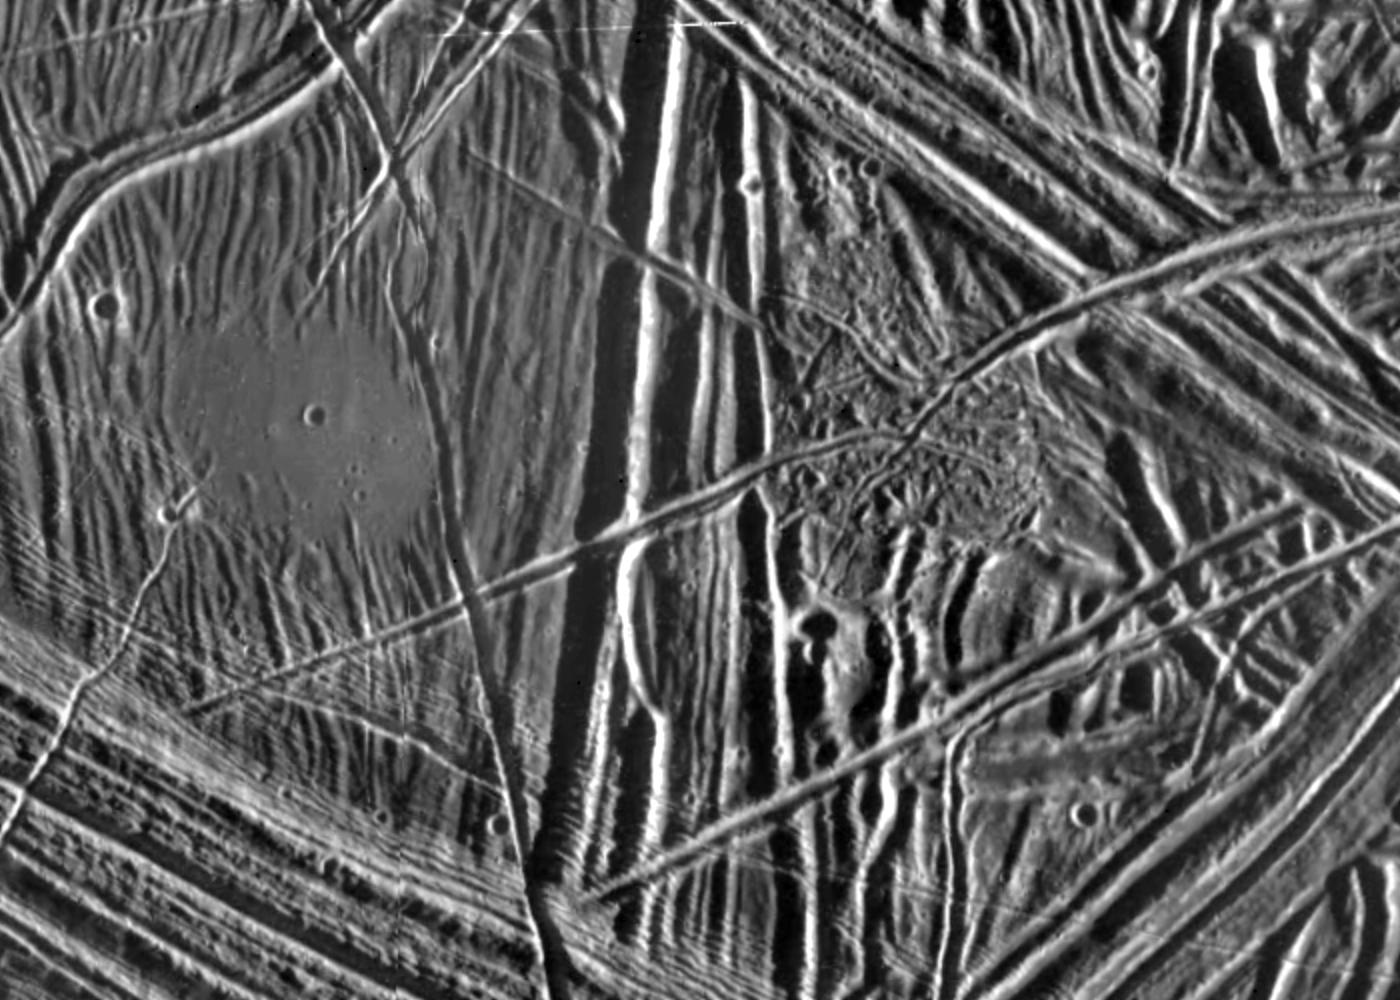 This close-up view of the icy surface of Europa, a moon of Jupiter, was obtained on December 20, 1996, by the Solid State Imaging system on board the Galileo spacecraft during its fourth orbit around Jupiter.